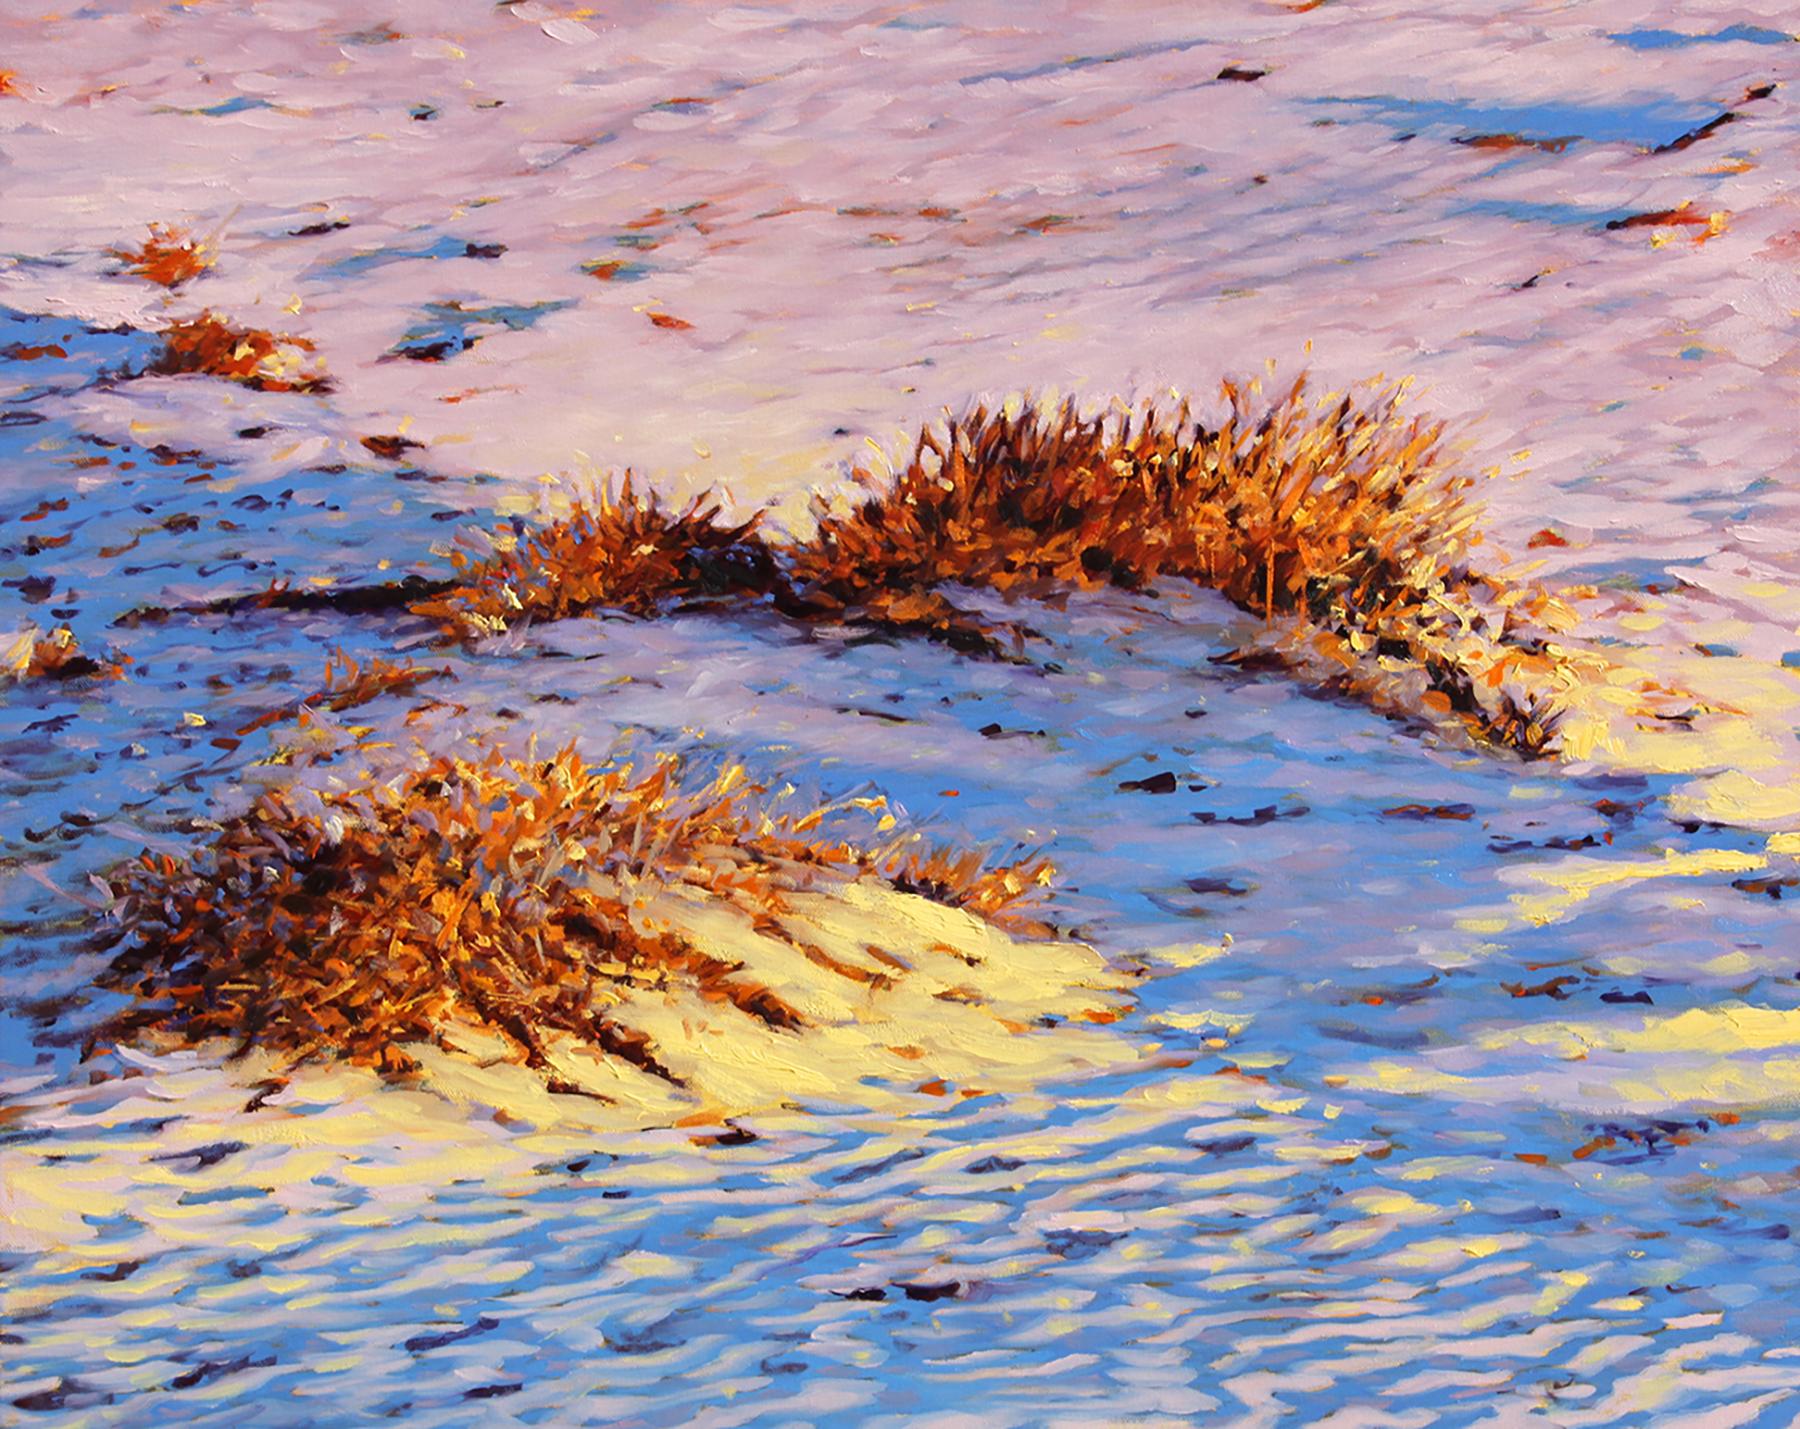 Tom Swimm Landscape Painting -  "Sand & Shadows" California Coastal Oil Painting With Atmospheric Light 